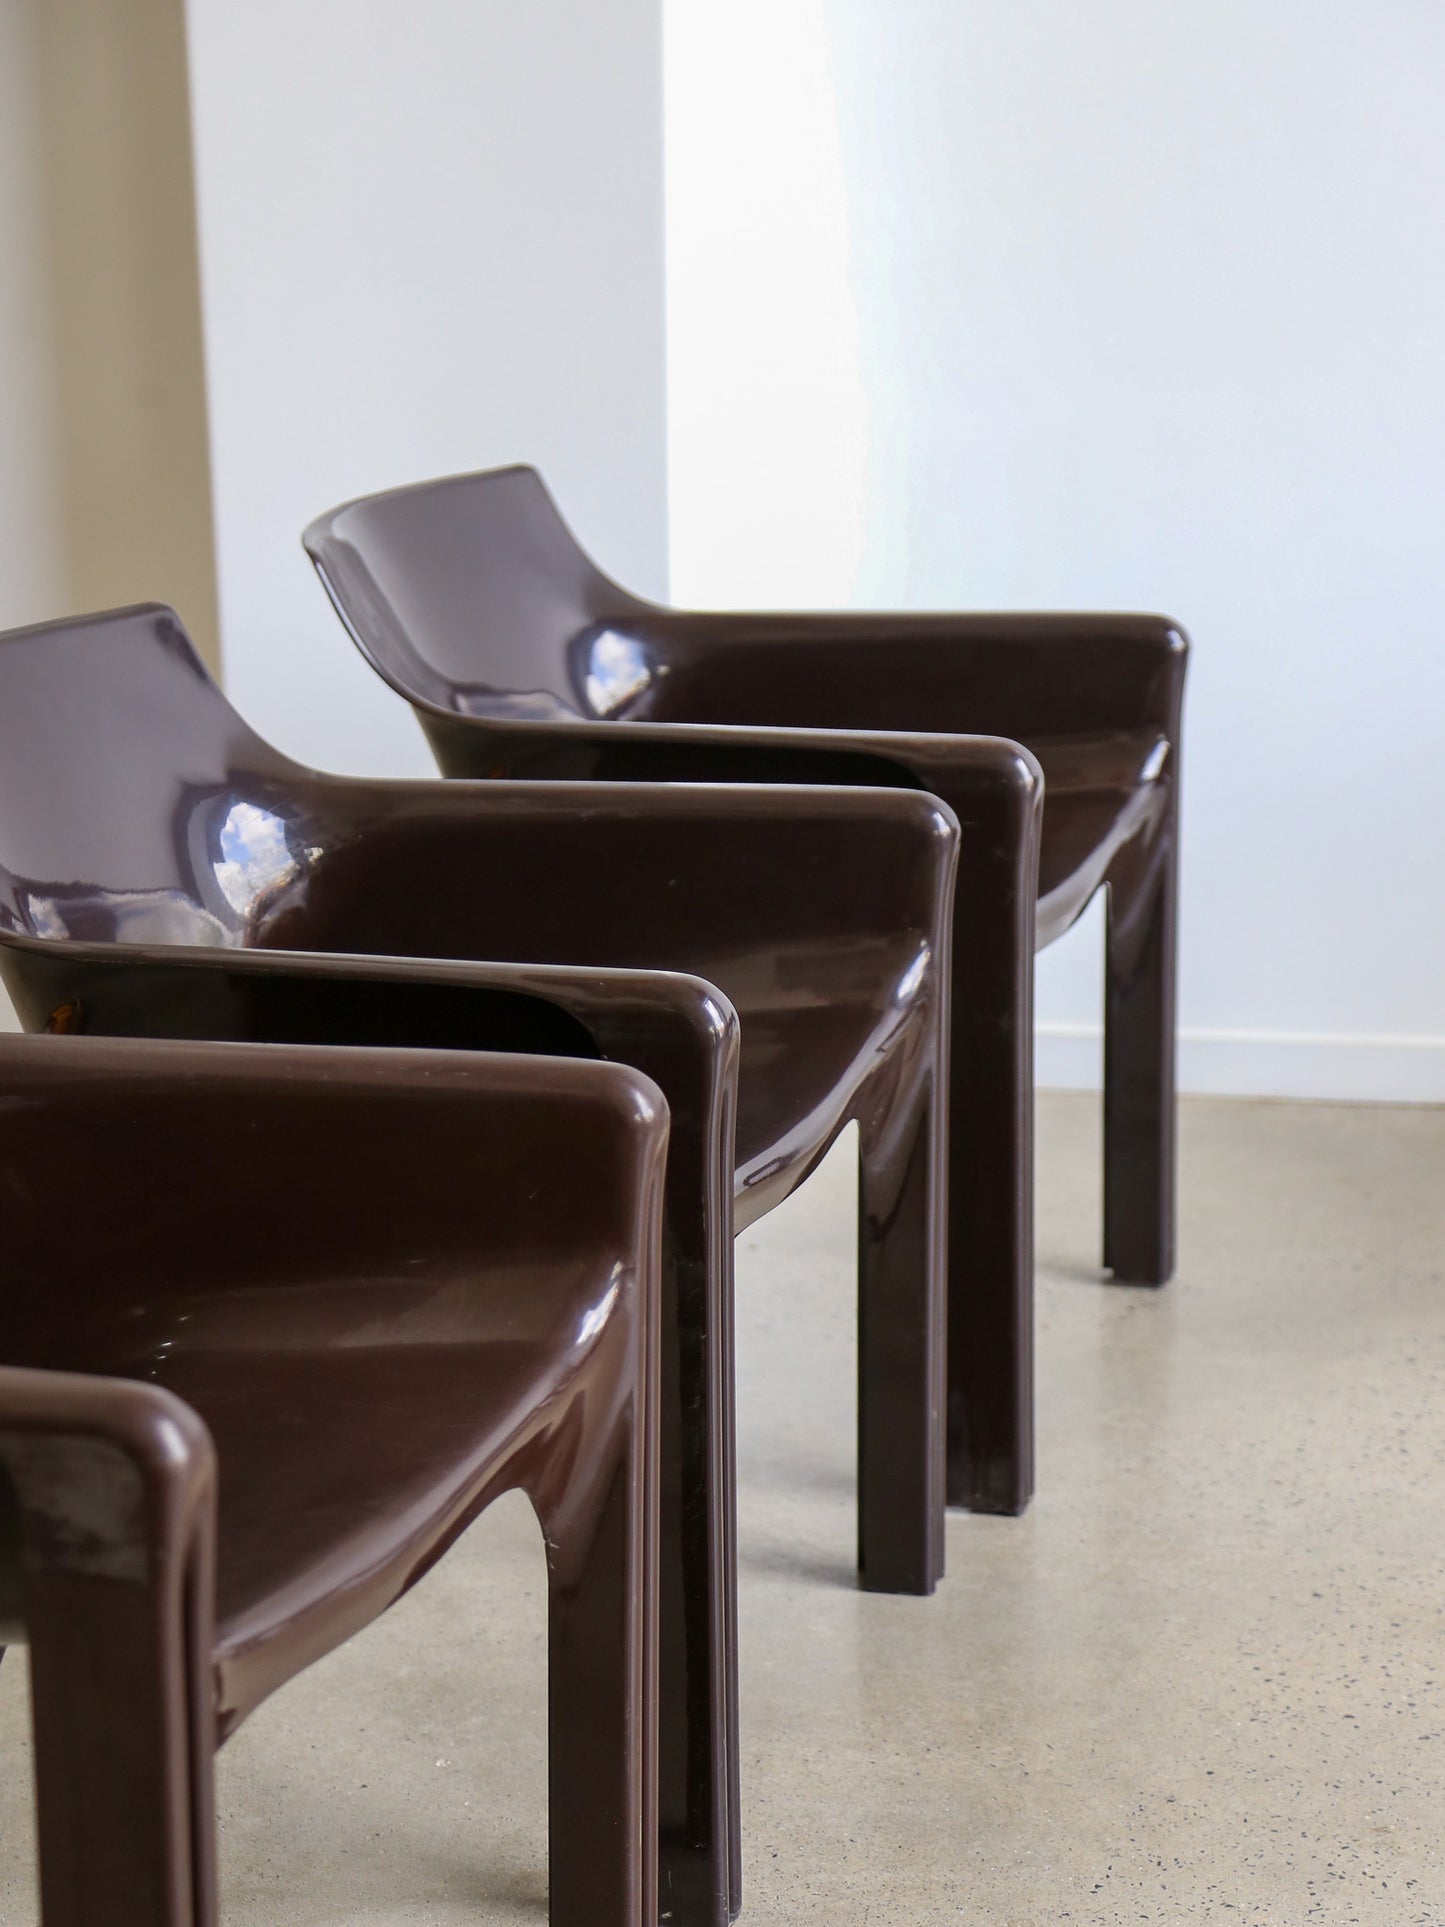 "Gaudi" Brown Chairs by Vico Magistretti for Artemide Set of Five 1970s